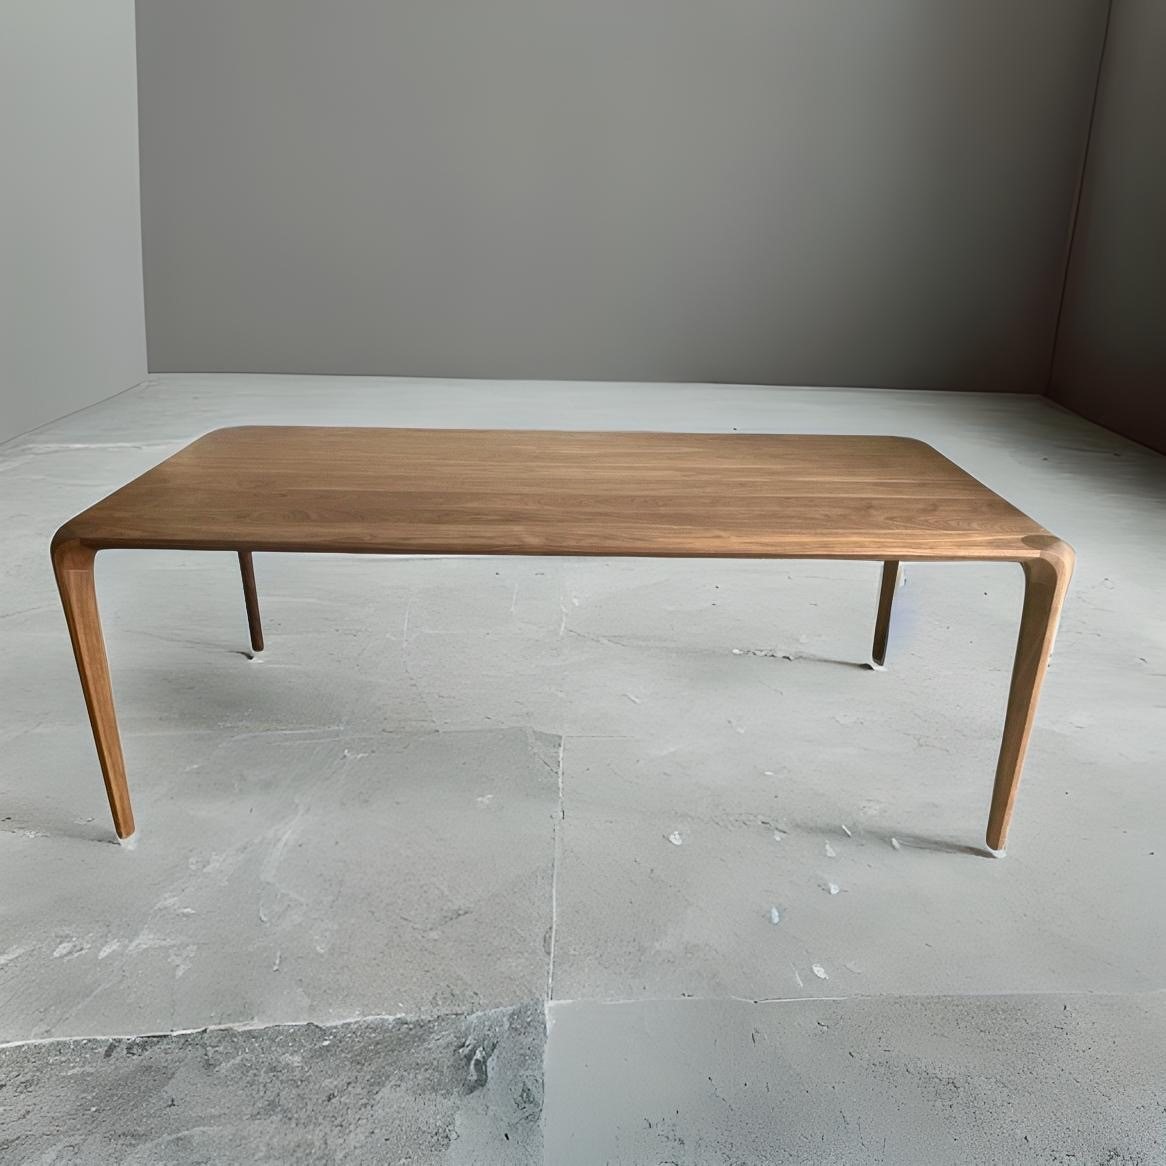 Image of Sara Dining Table by Arranmore Furniture, showcasing its sleek design and stable base, perfect for any dining room.